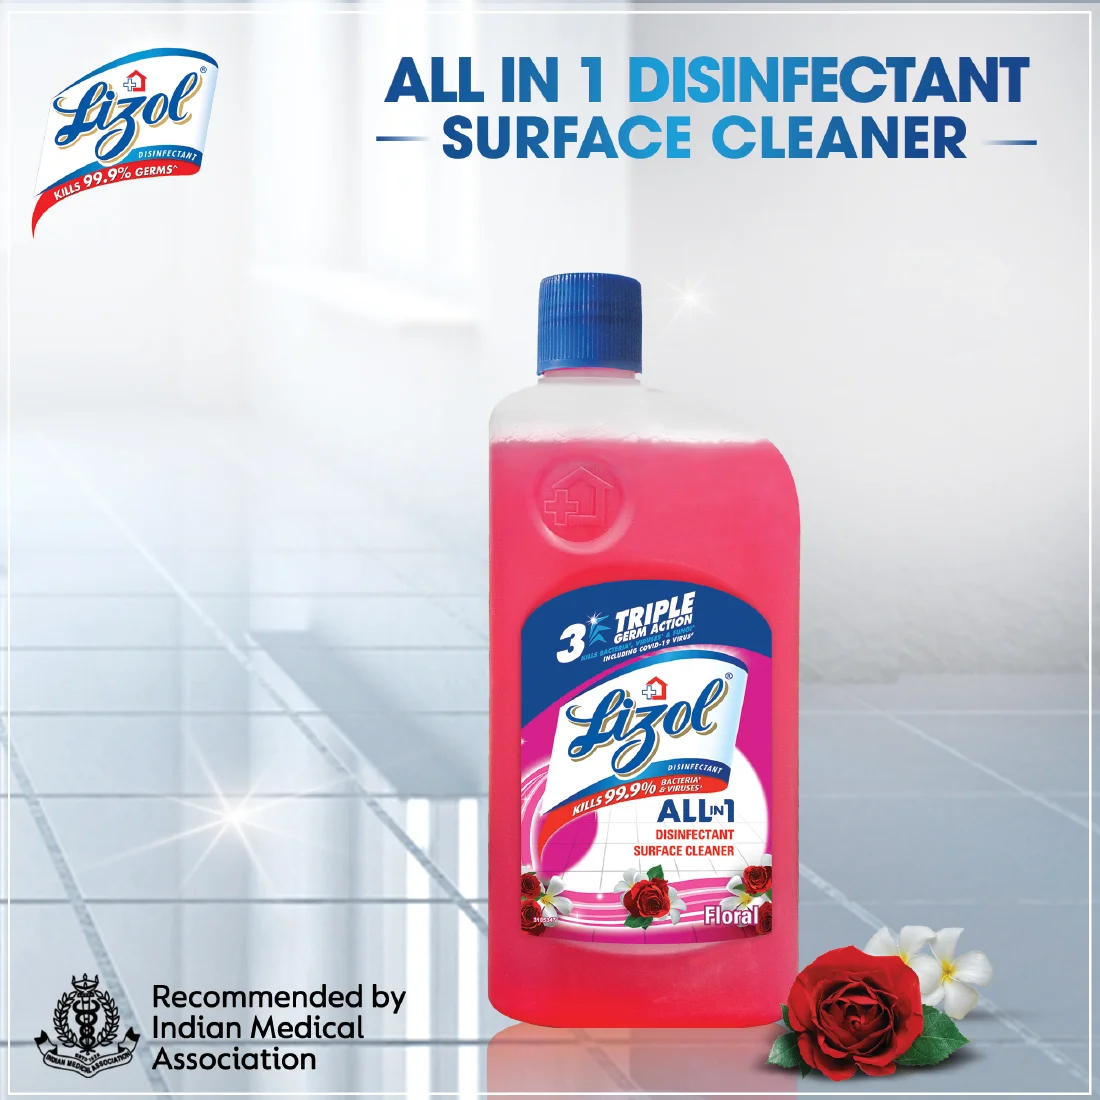 Lizol Disinfectant Surface Cleaner, Floral, 975ml